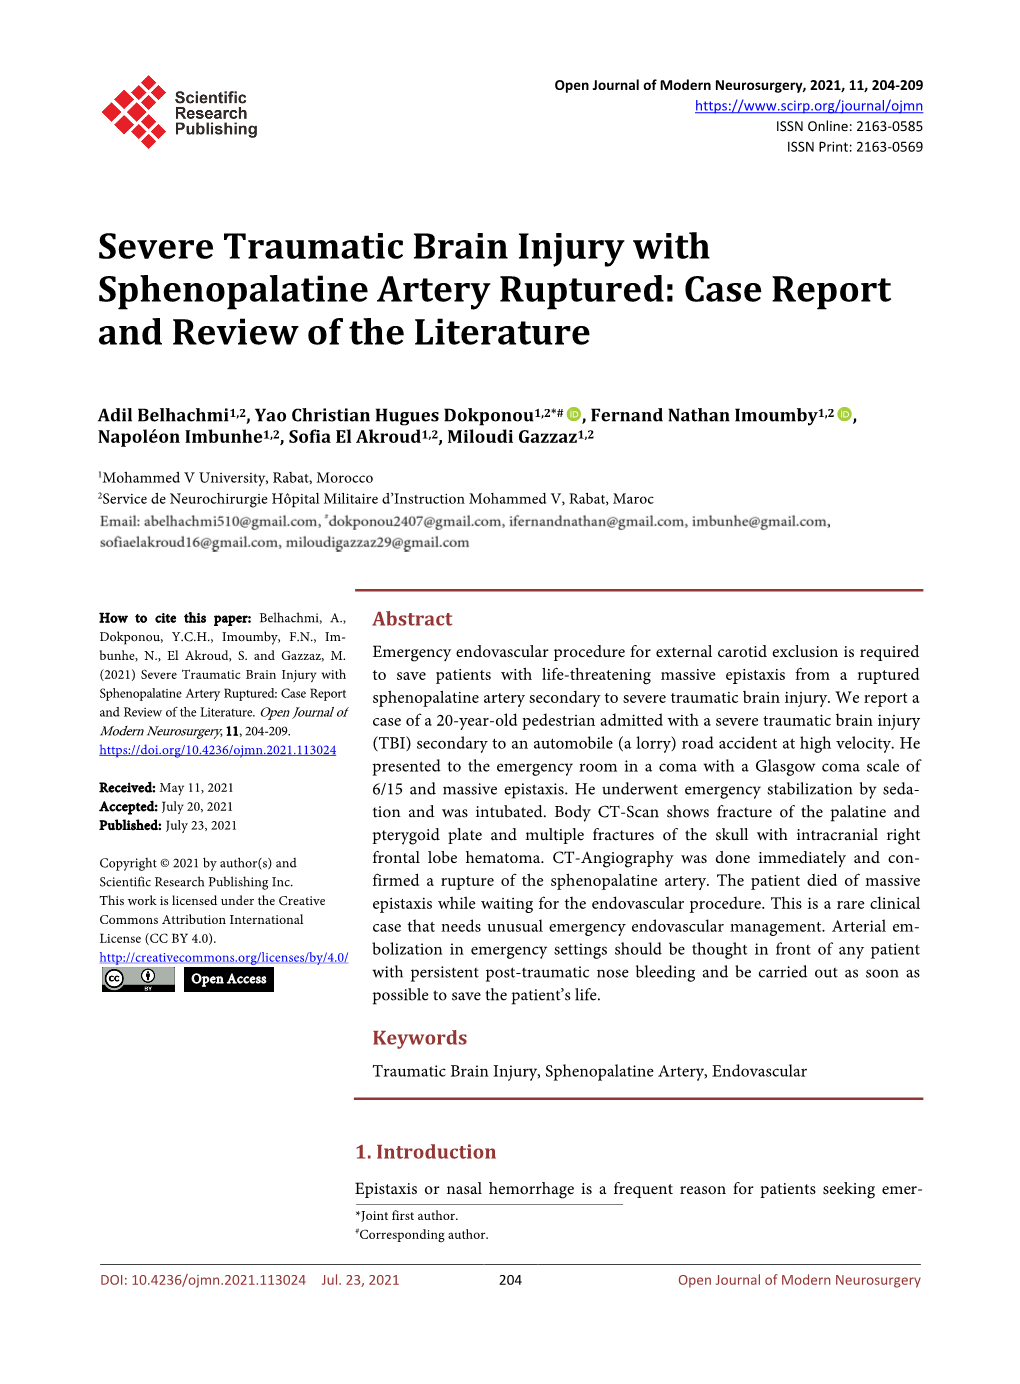 Severe Traumatic Brain Injury with Sphenopalatine Artery Ruptured: Case Report and Review of the Literature